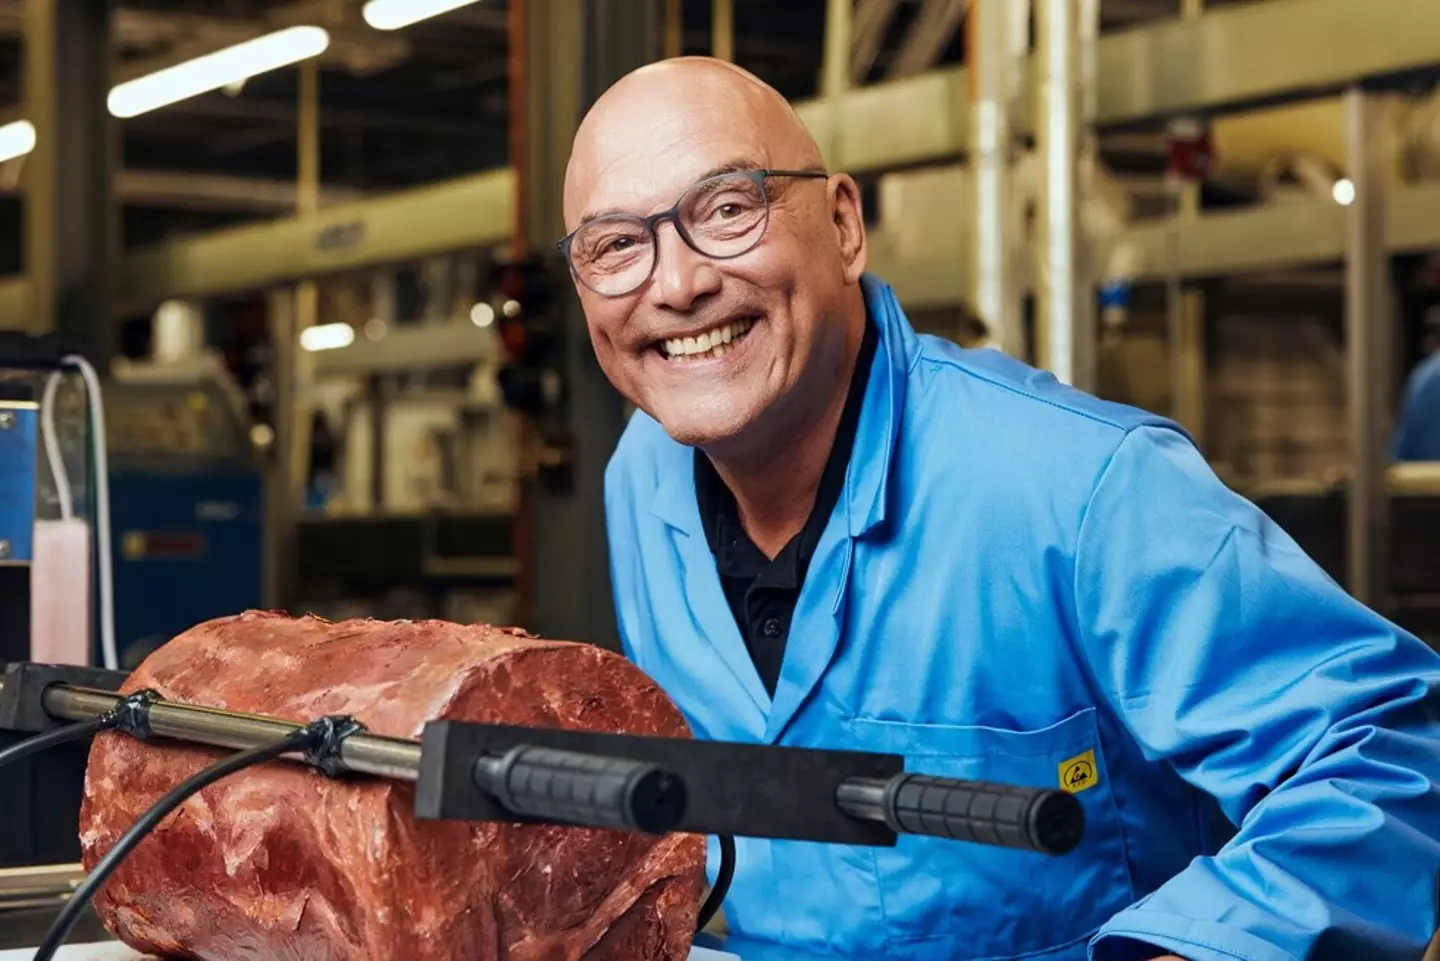 TV chef Gregg Wallace has come under some serious fire for the documentary.